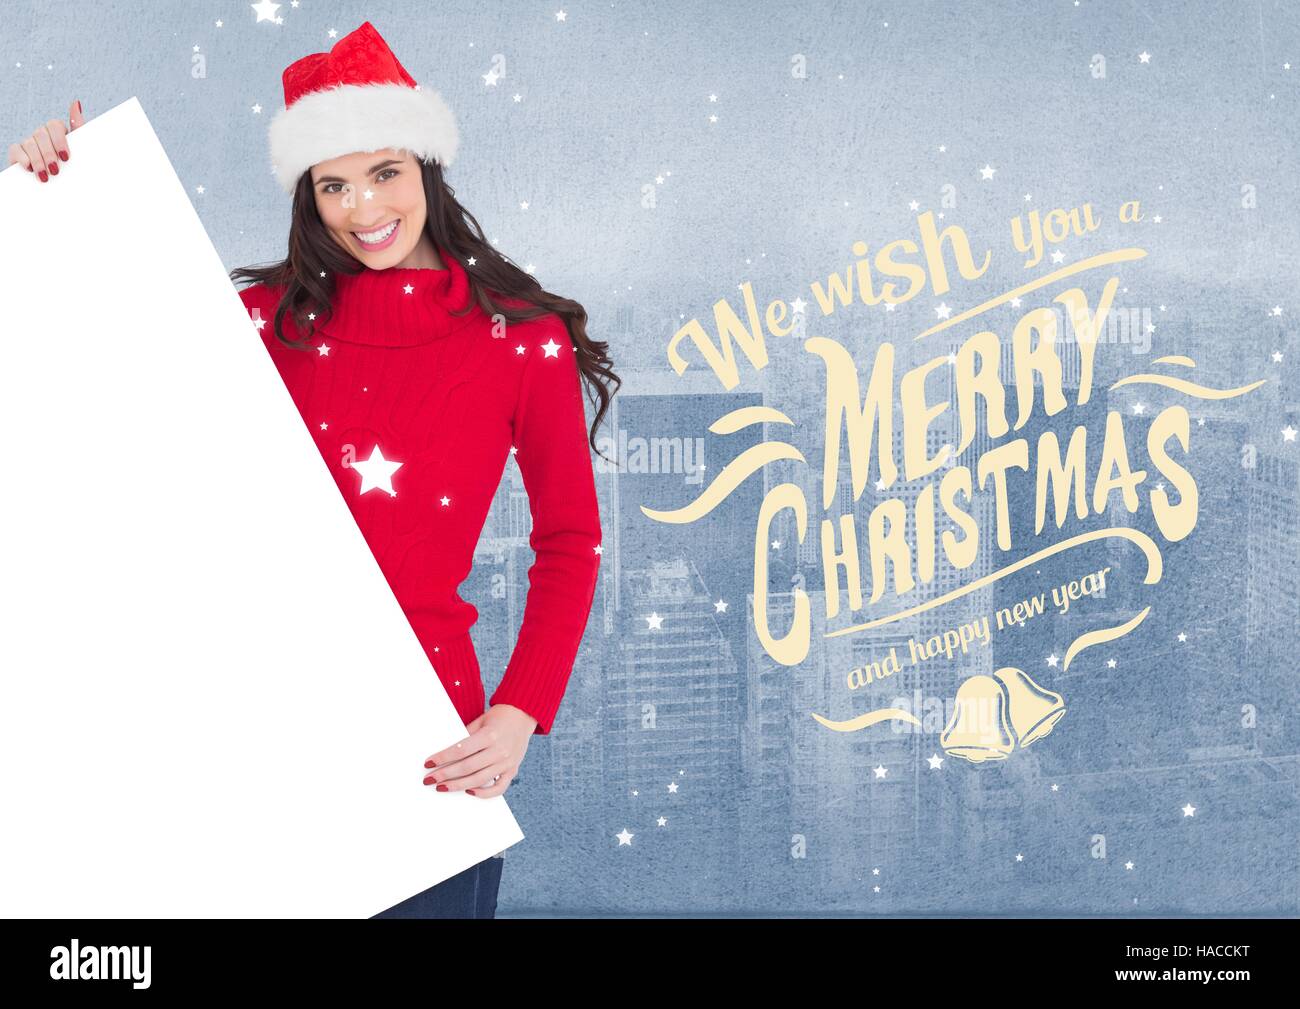 Merry christmas wishes and woman in santa hat holding a blank placard Stock Photo